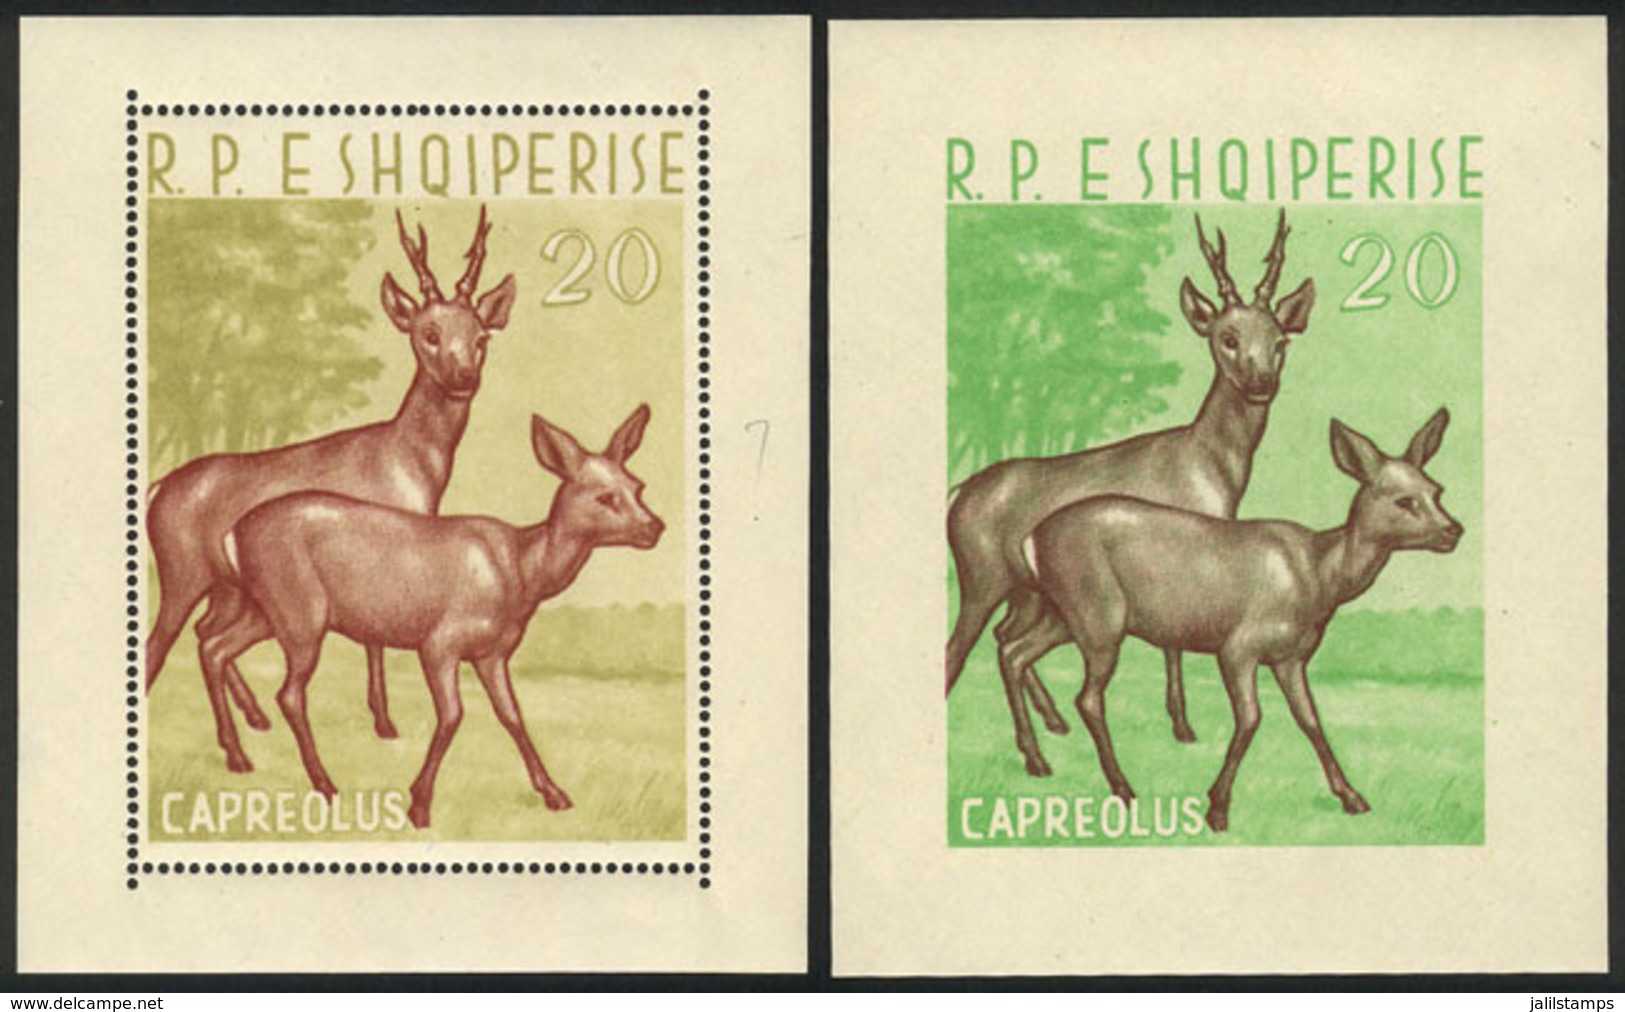 ALBANIA: Sc.643, 1962 20l. Deer, Perforated And Imperforate Sheets, MNH, Excellent Quality, Catalog Value US$260 - Albanien